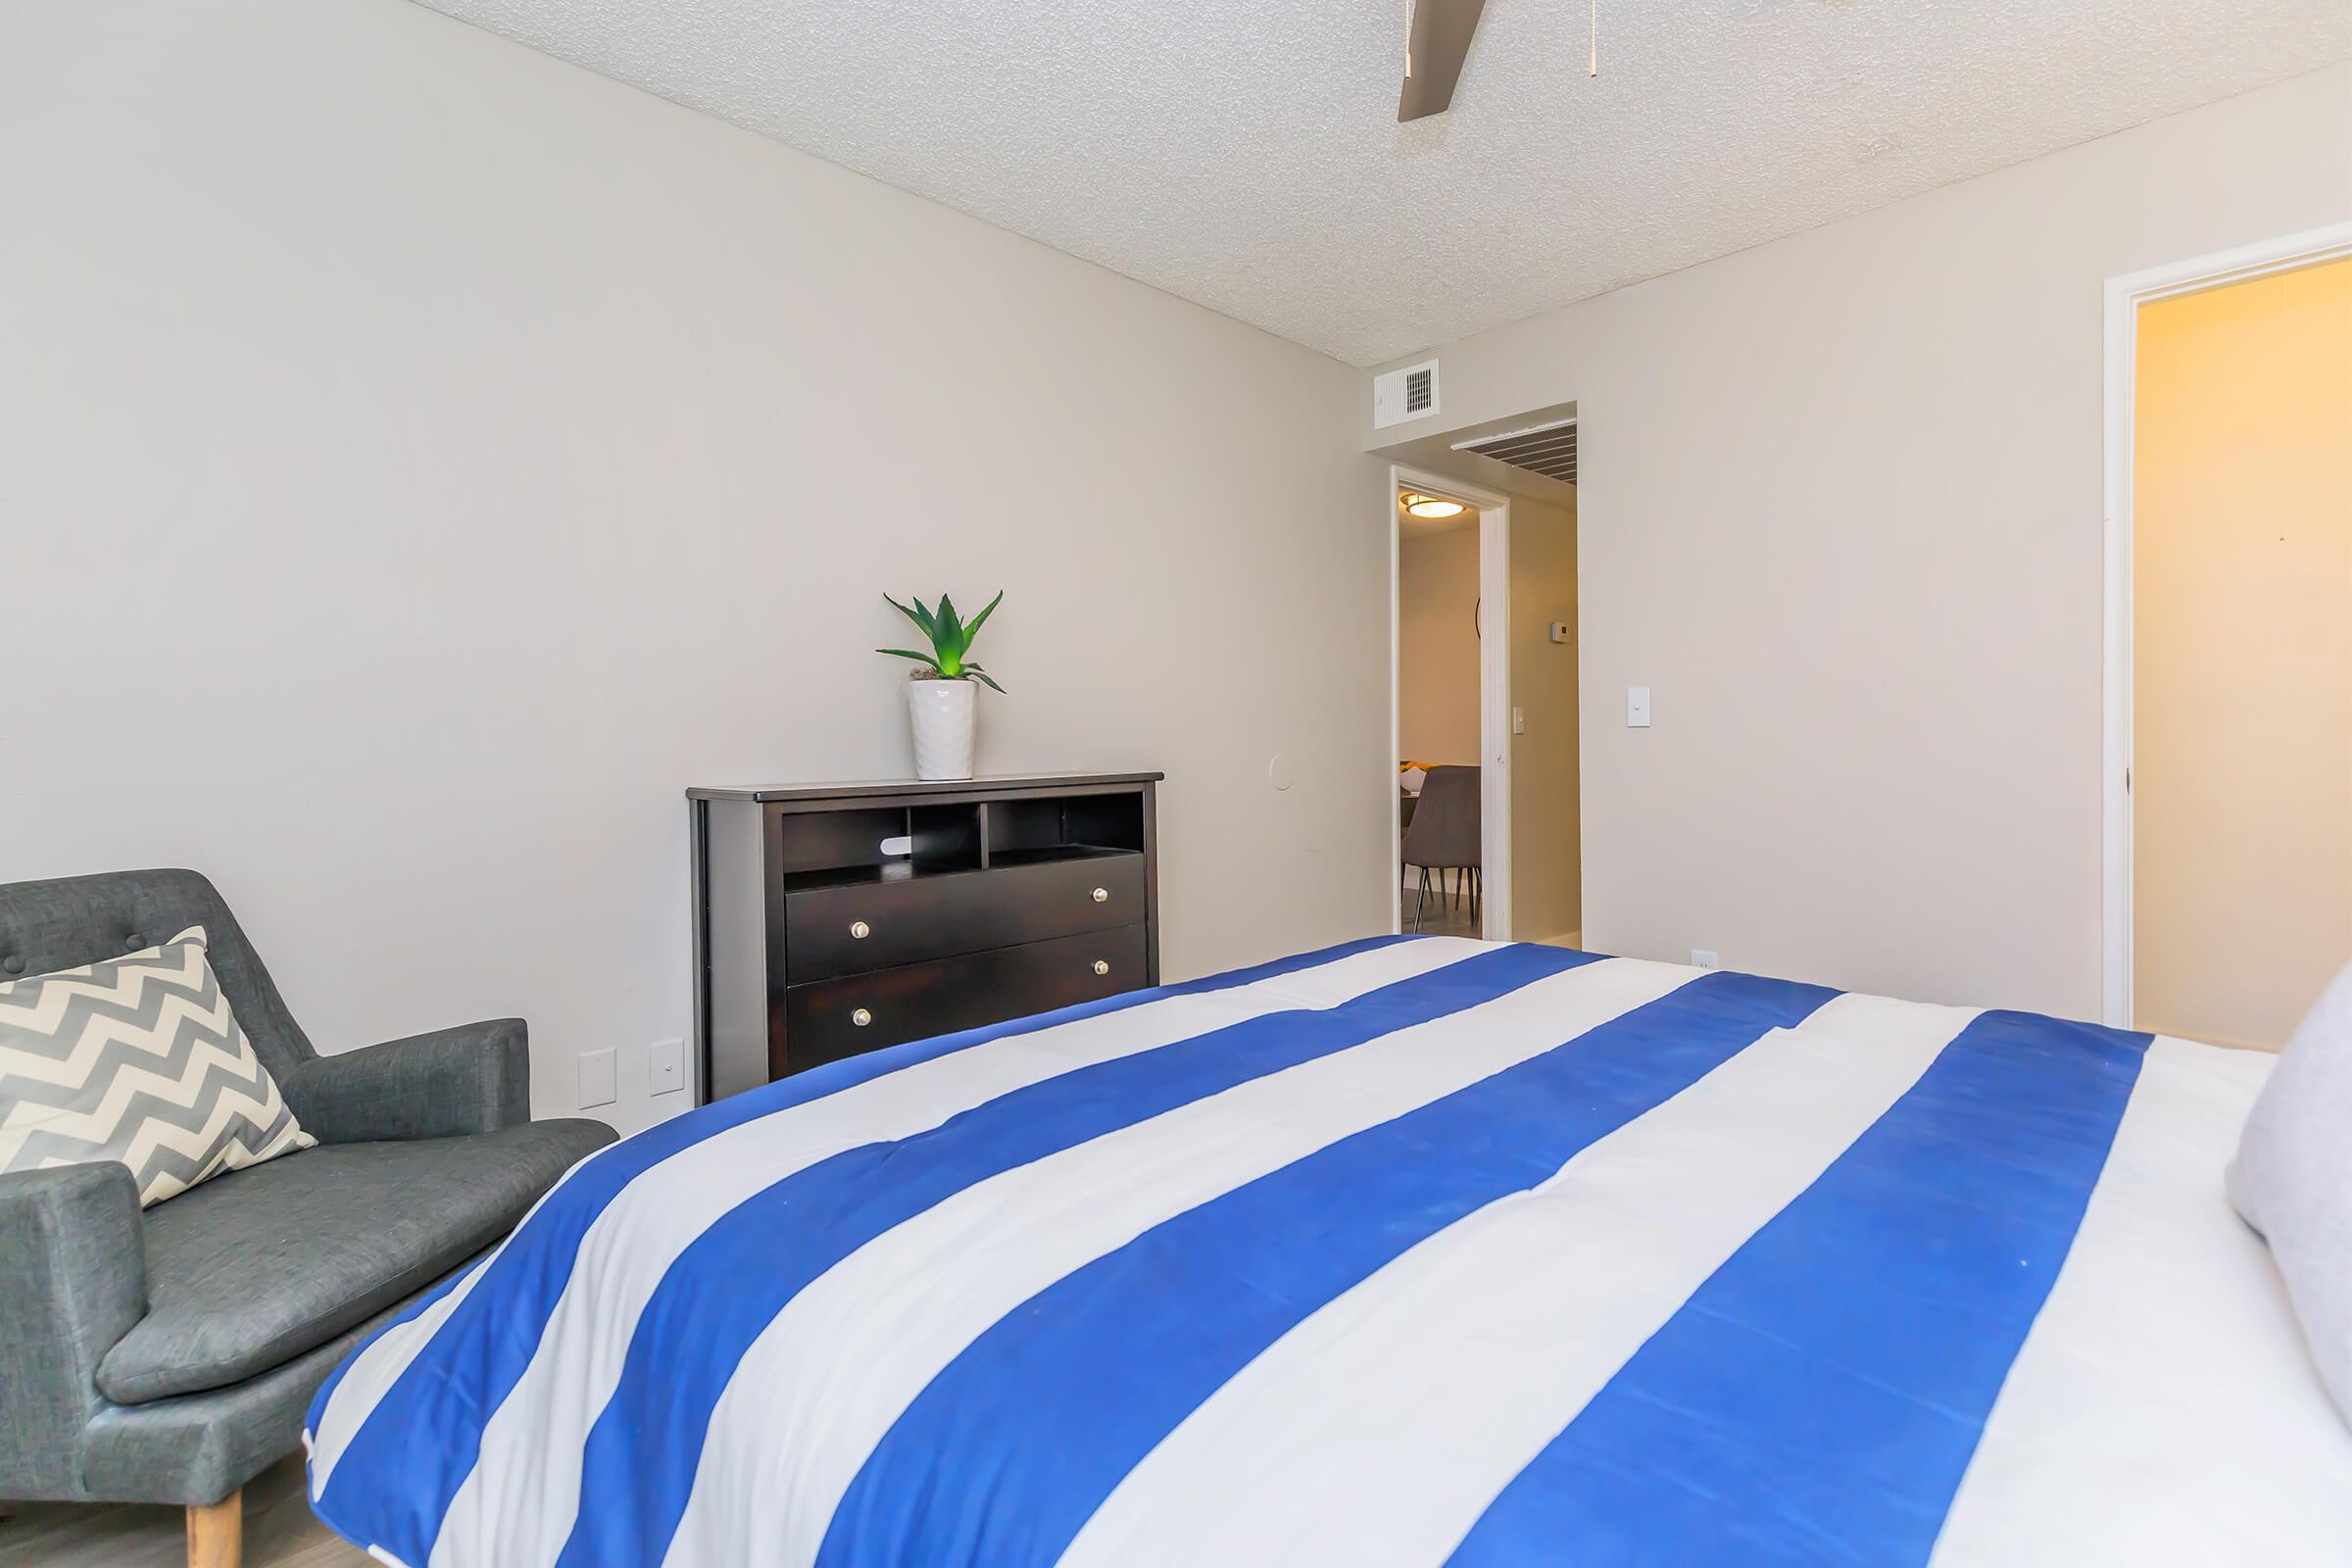 Spacious one bedroom with attached closet and bathroom